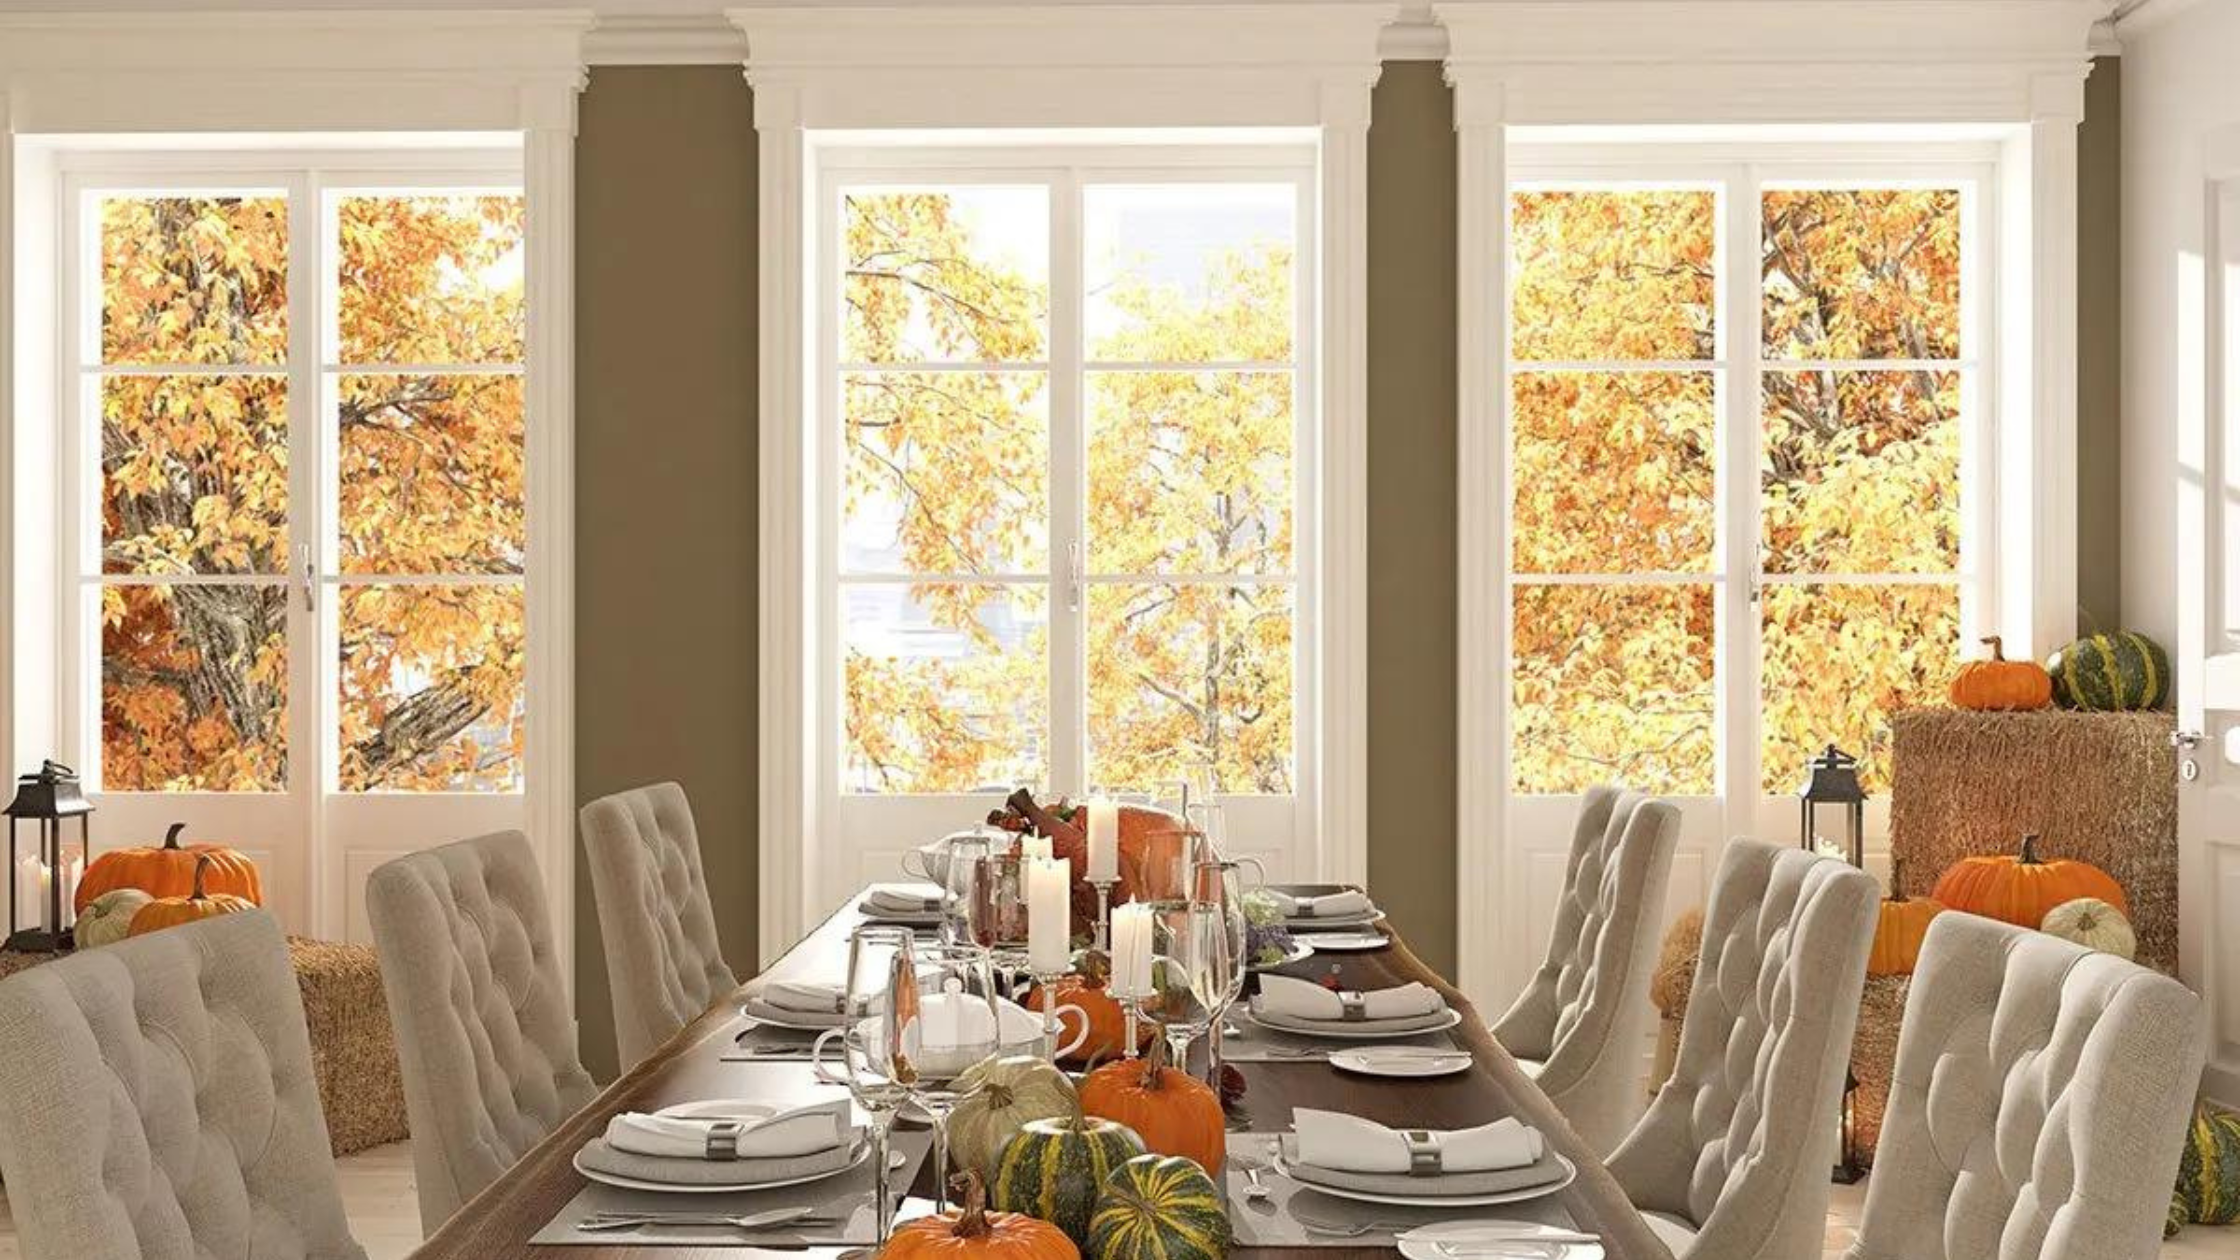 Thanksgiving table decorated with straw bales and pumpkins. Walls are painted in a lovely fall beige. Shop for interior wall paint at JC Licht in Chicago, IL